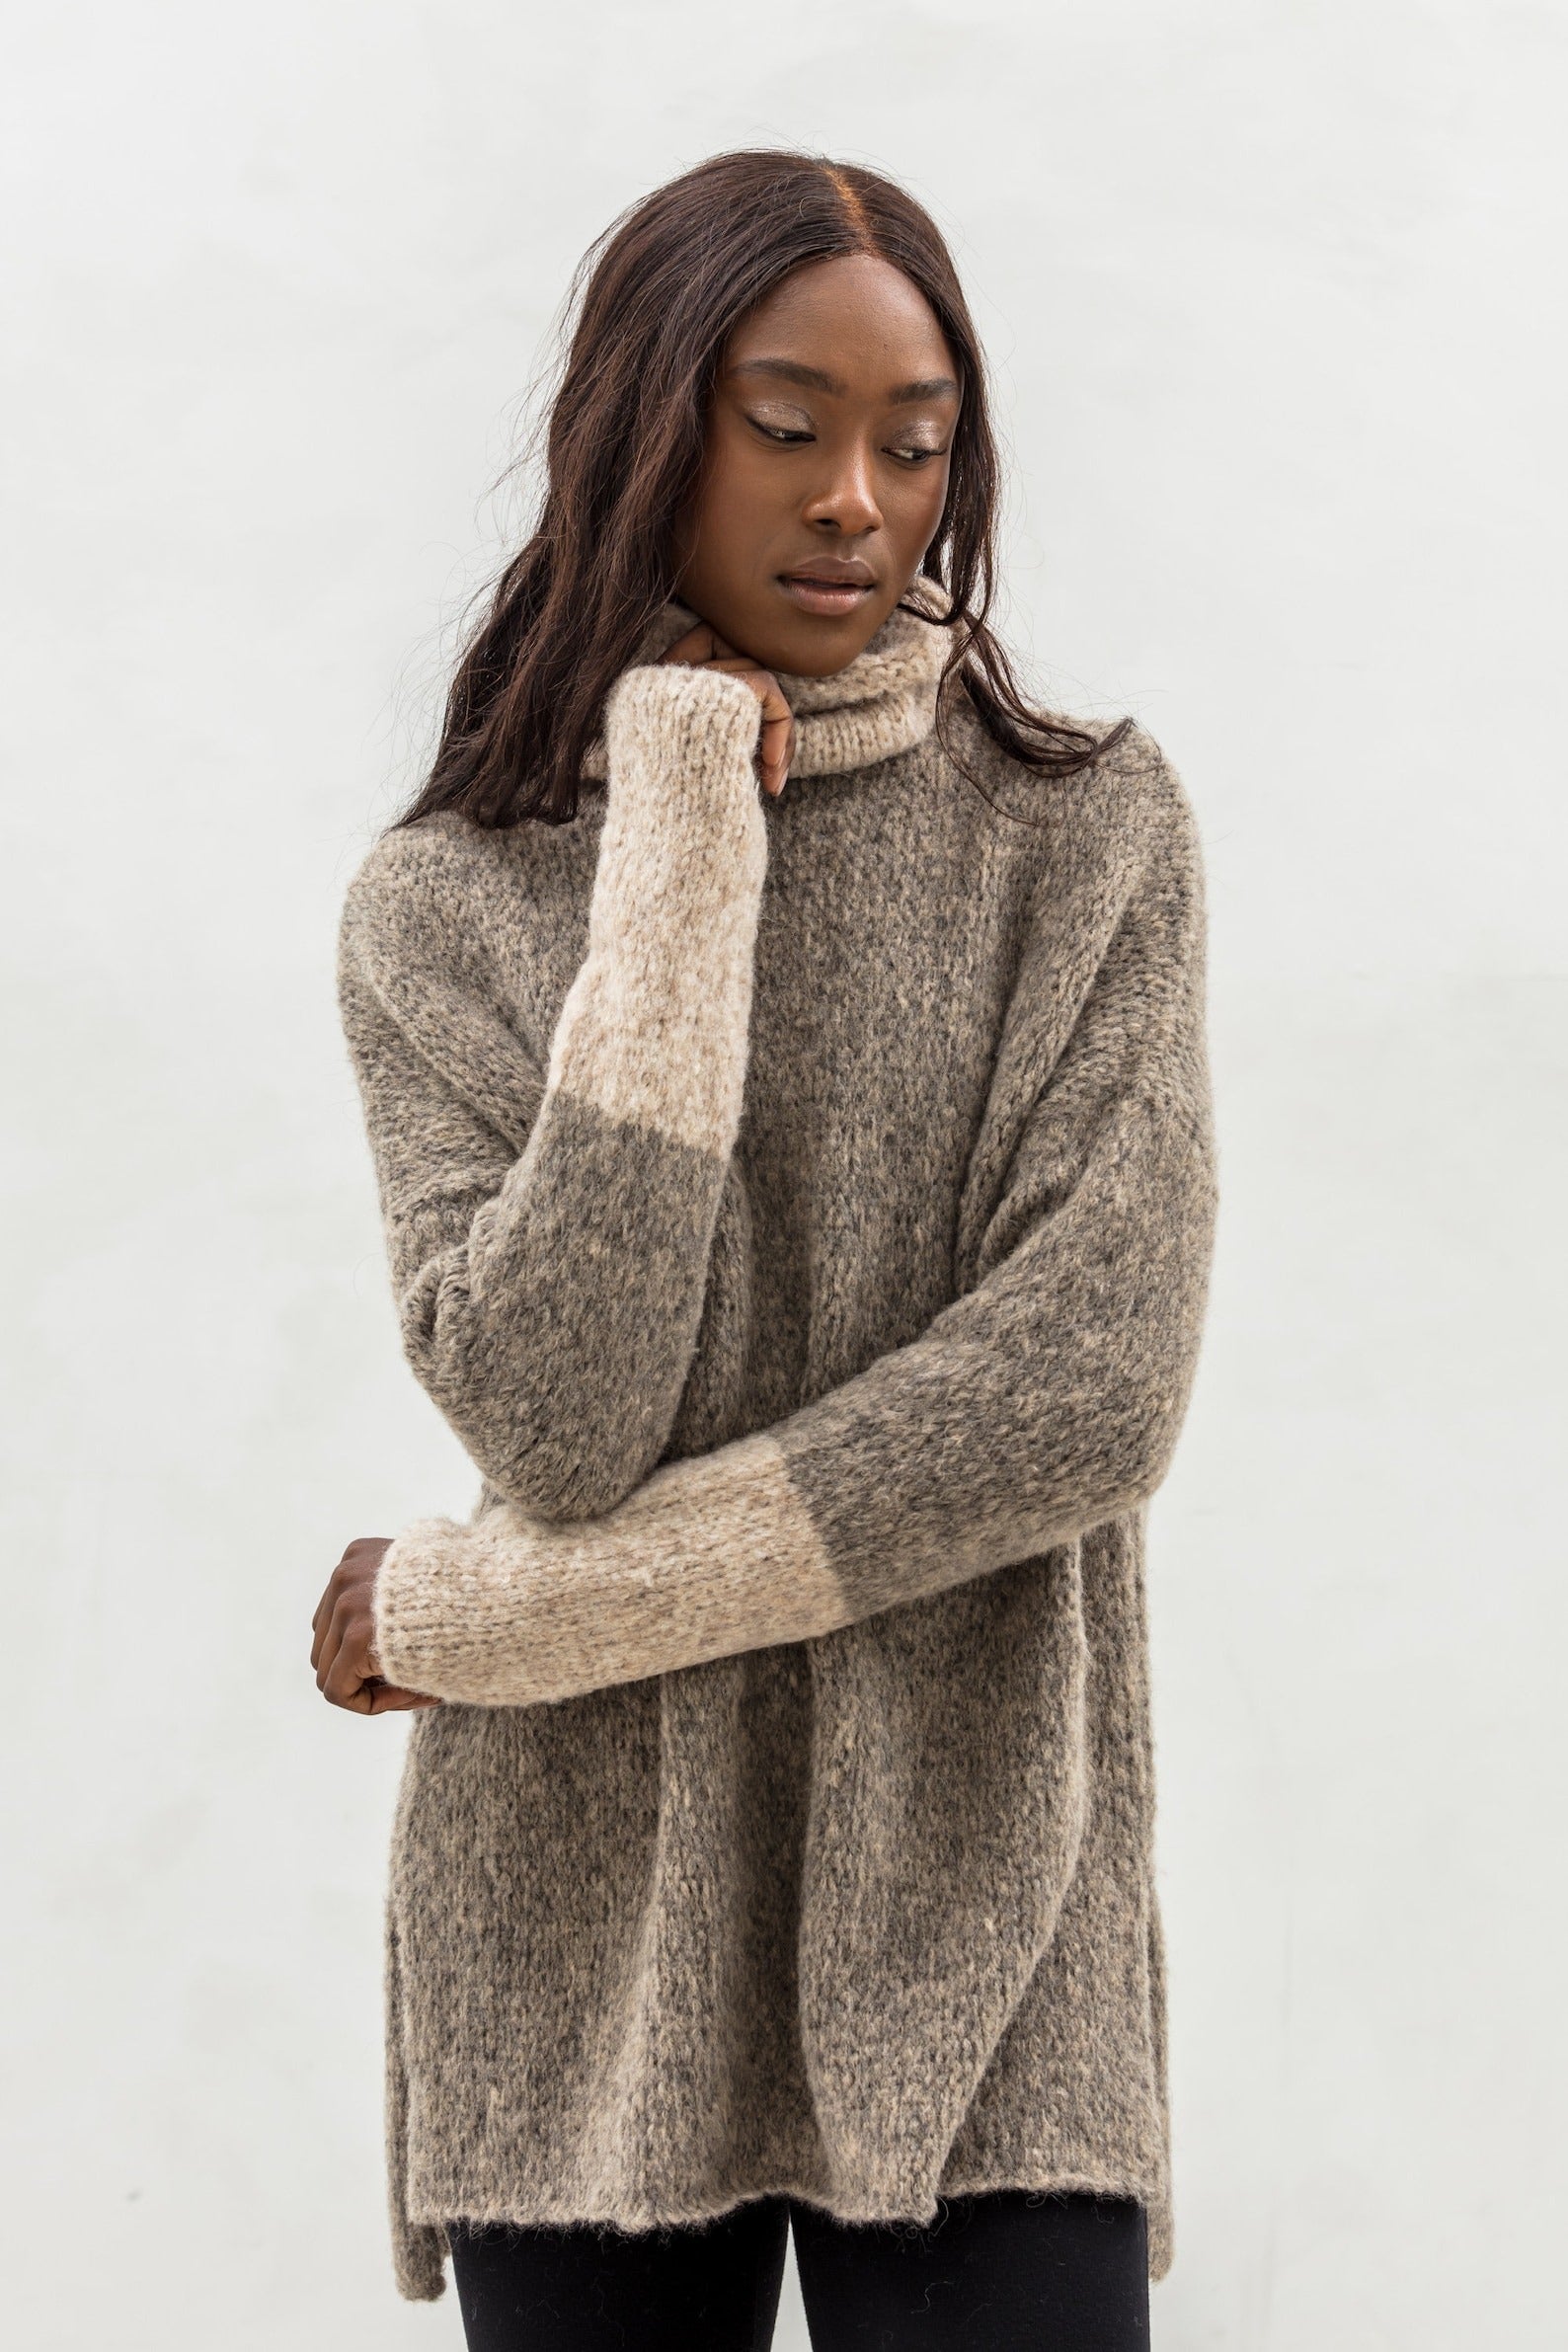 The Effortlessly Wearable Long Shirt and Cozy Sweater Trend - Verily